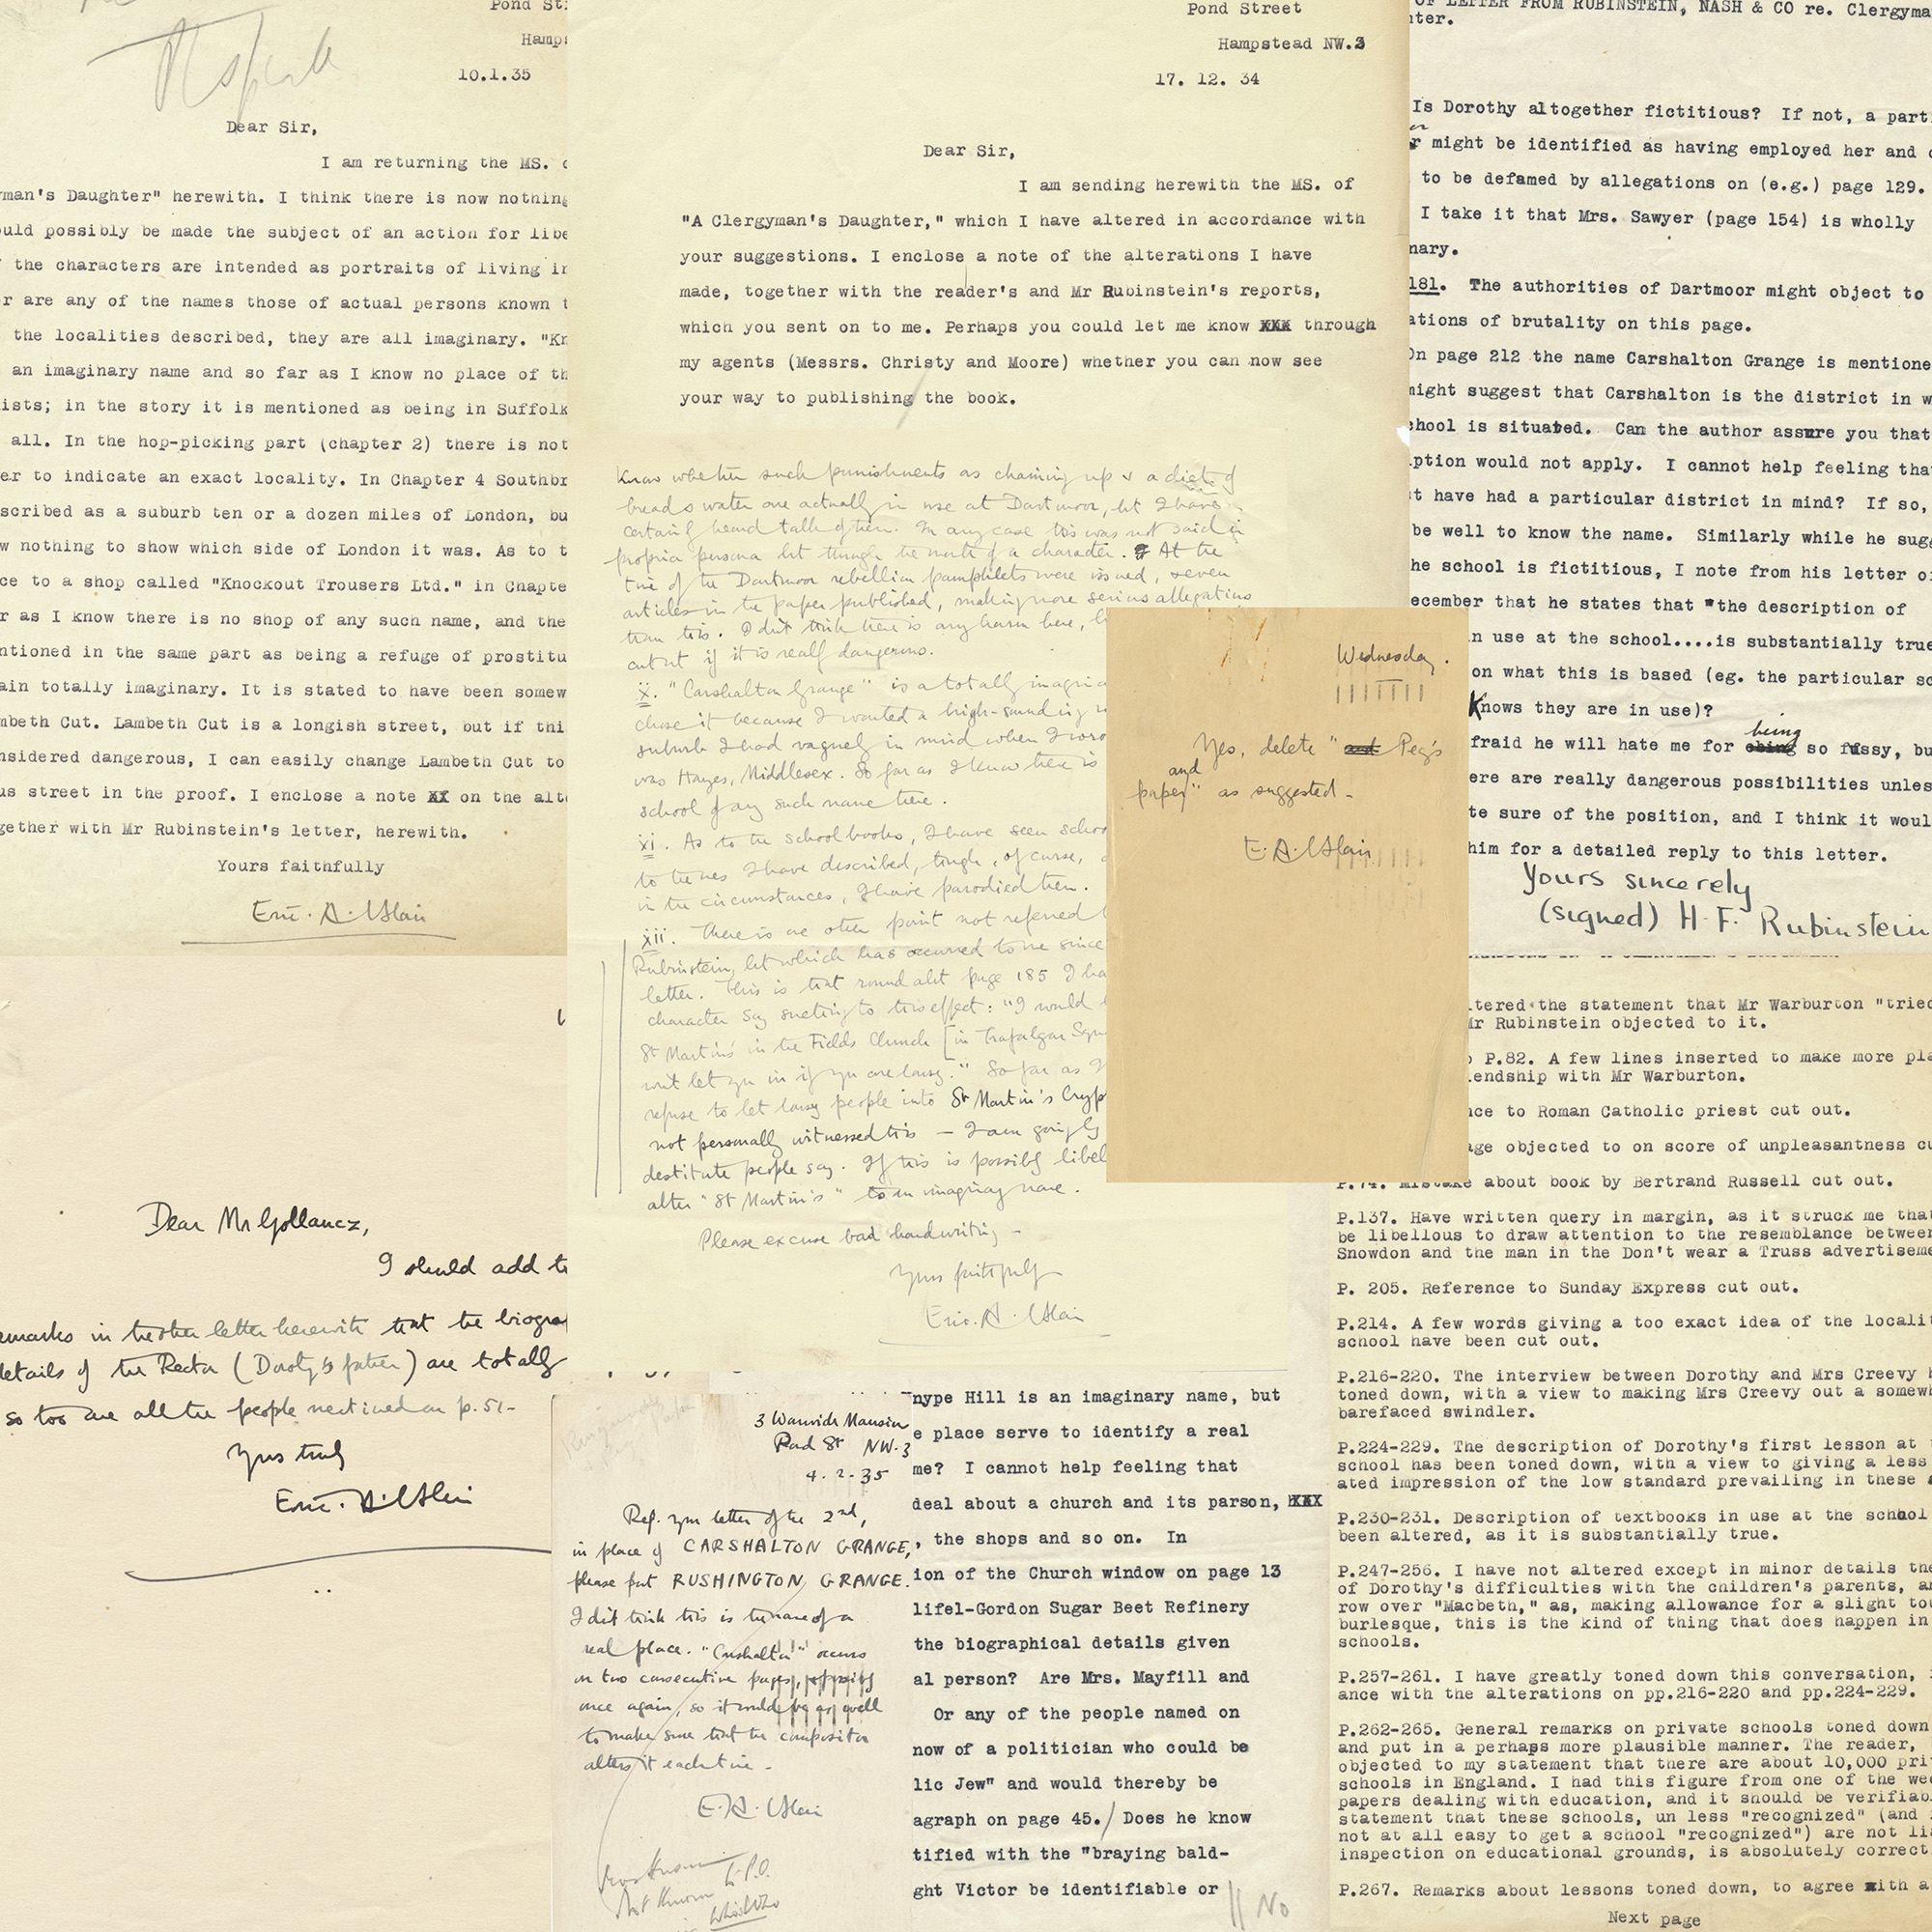 Publisher's Archive of Correspondence Relating to a Clergyman's Daughter - , 